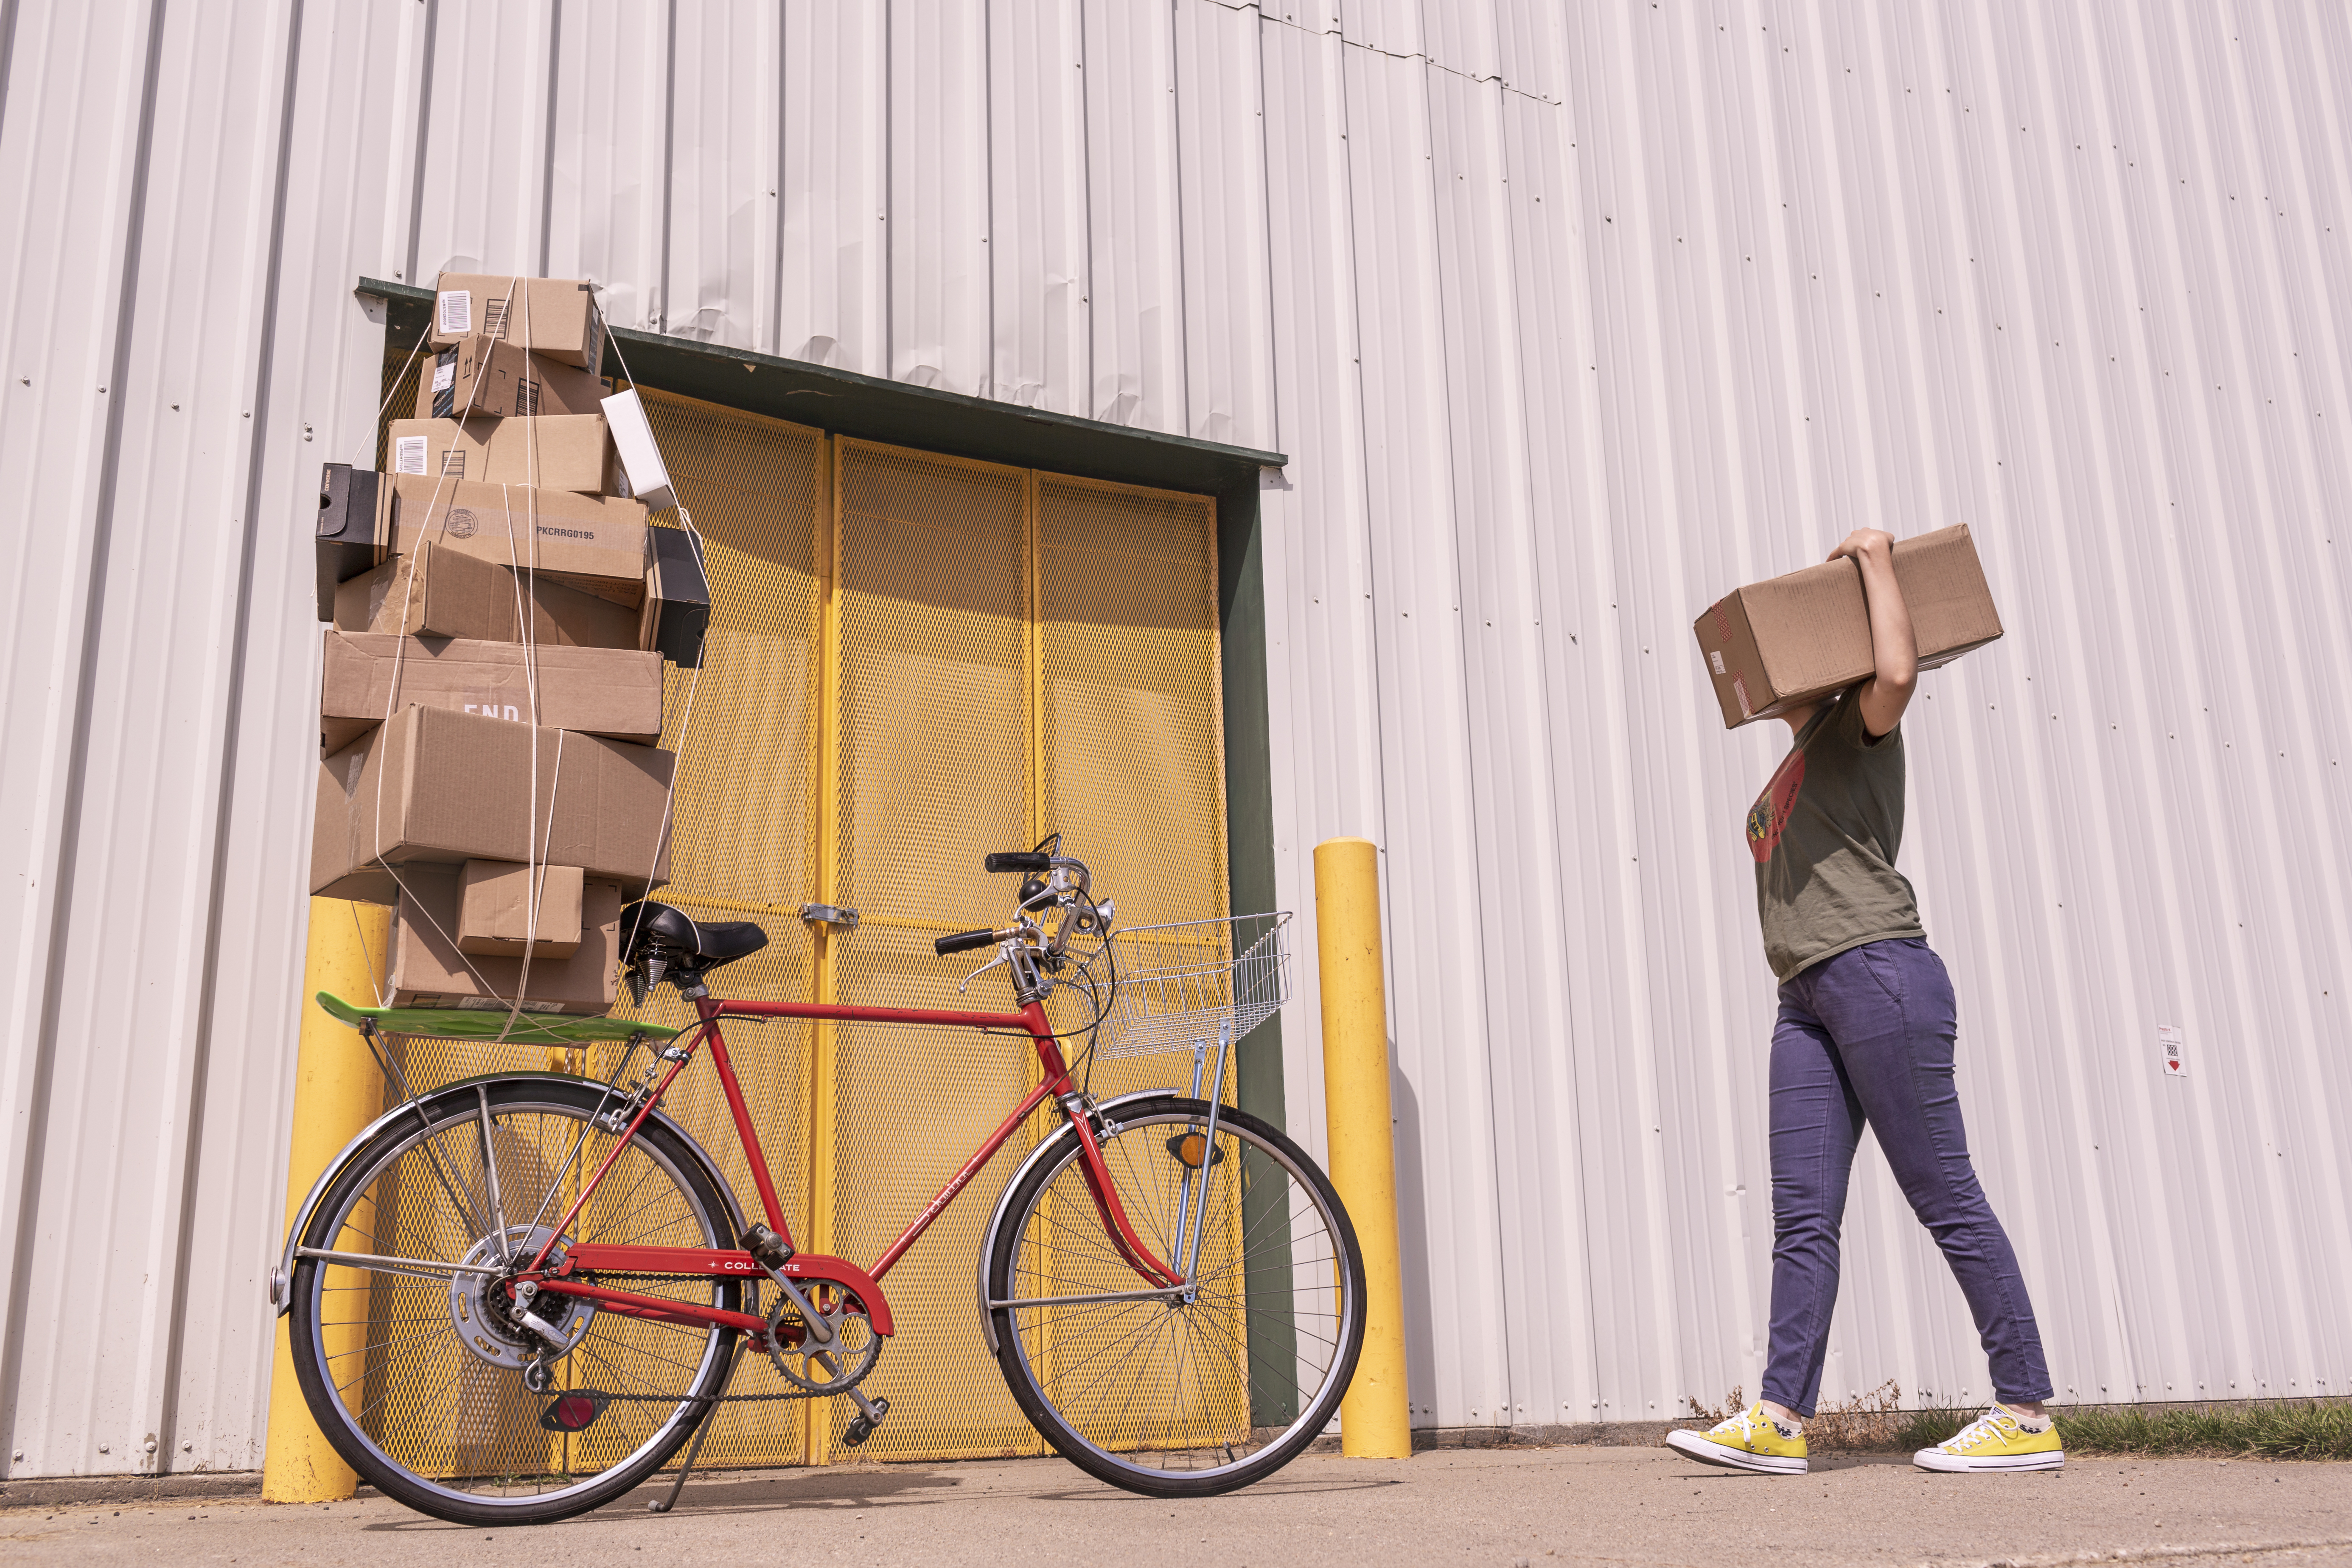 packages stacked precariously on the rack of a bike with courier carrying a package on their shoulder